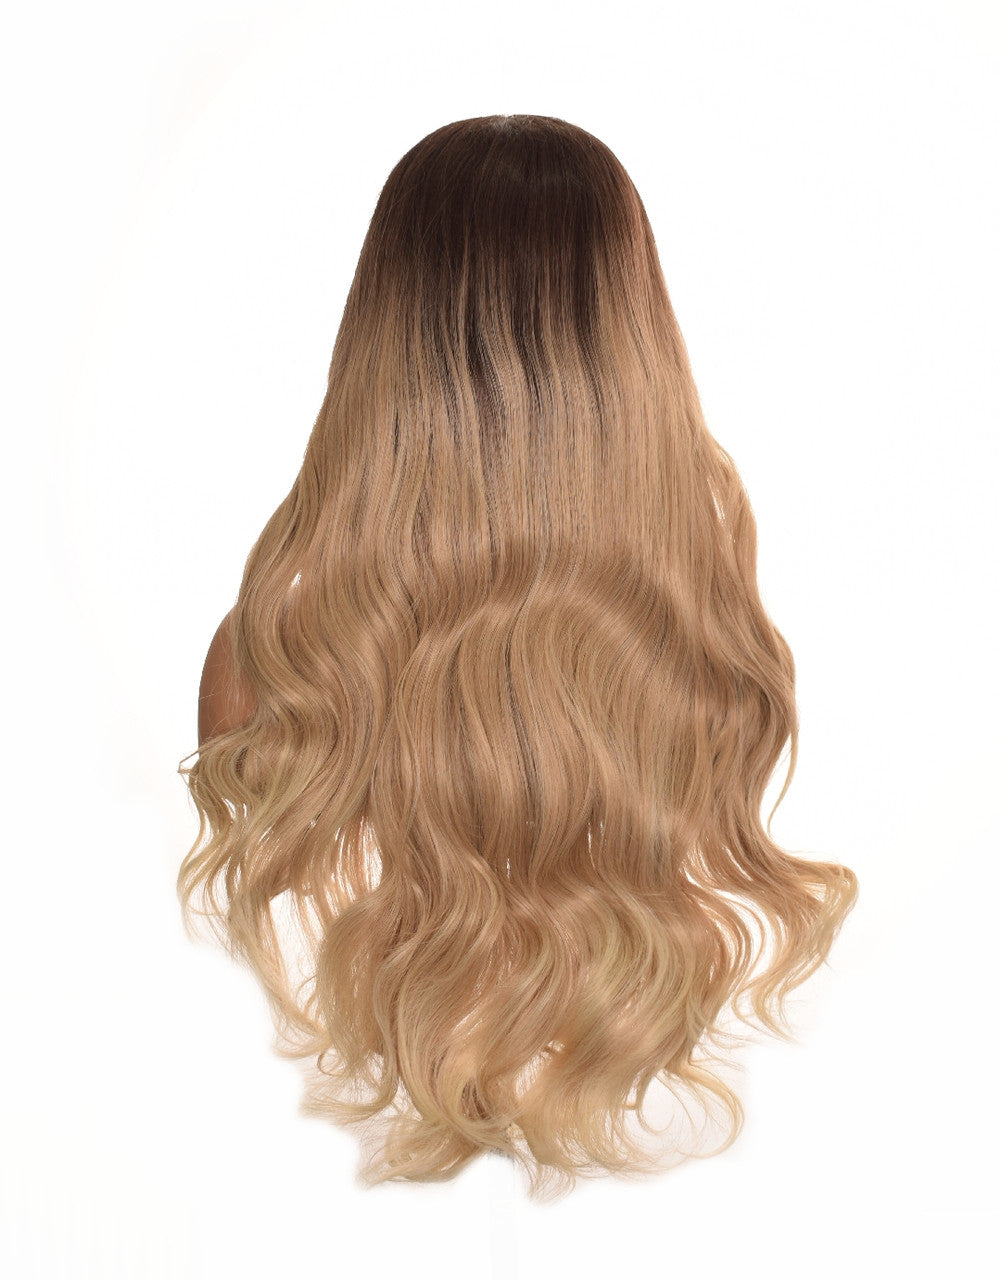 Ombre Long Wavy Brown Blonde Lace Front Wig. Kris